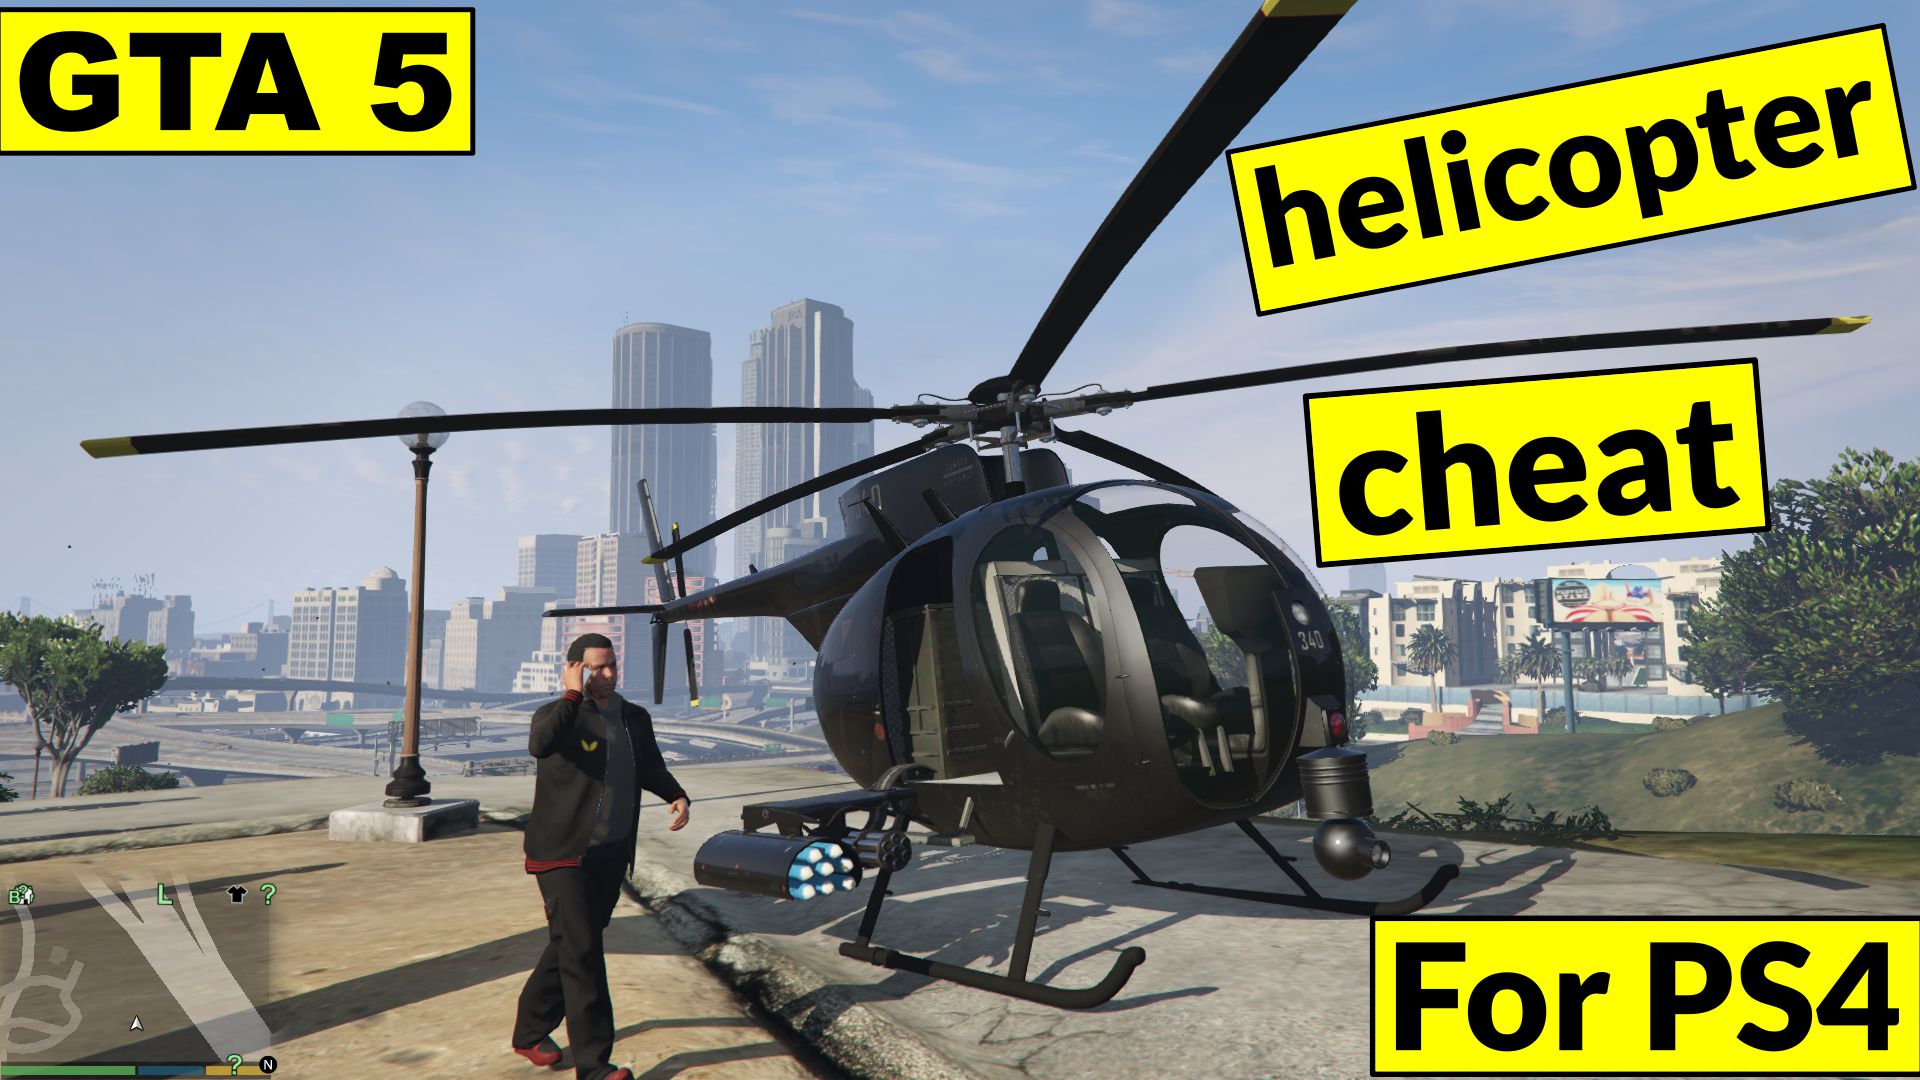 GTA 5 helicopter cheat for PS4